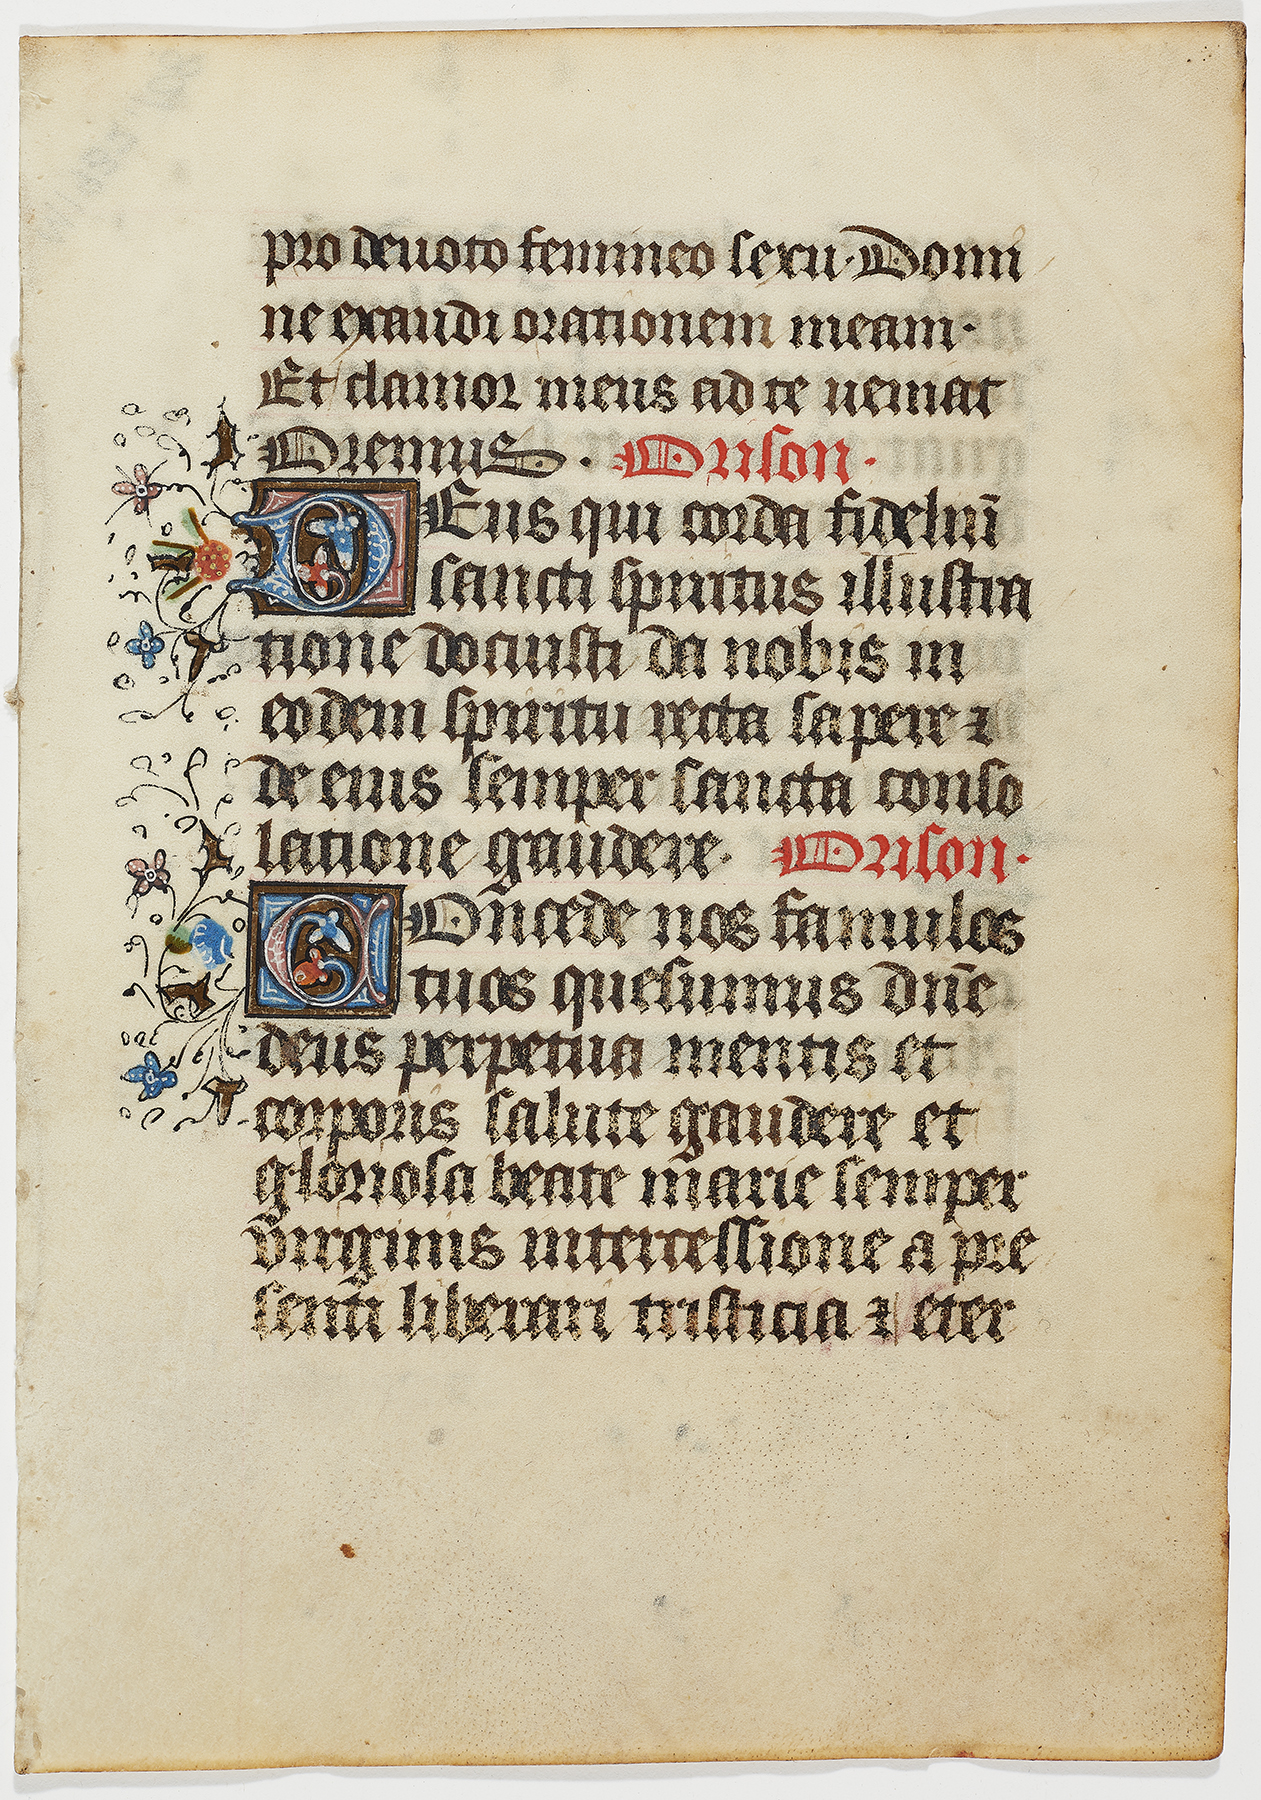 French, Leaf from a Liturgical Psalter, early 14th century. Tempera, ink, and gold leaf on parchment. 6 3/8 × 4 7/16 in. (16.19 × 11.27 cm). Milwaukee Art Museum, Gift of Paula Uihlein M1932.108. Photo credit: John R. Glembin